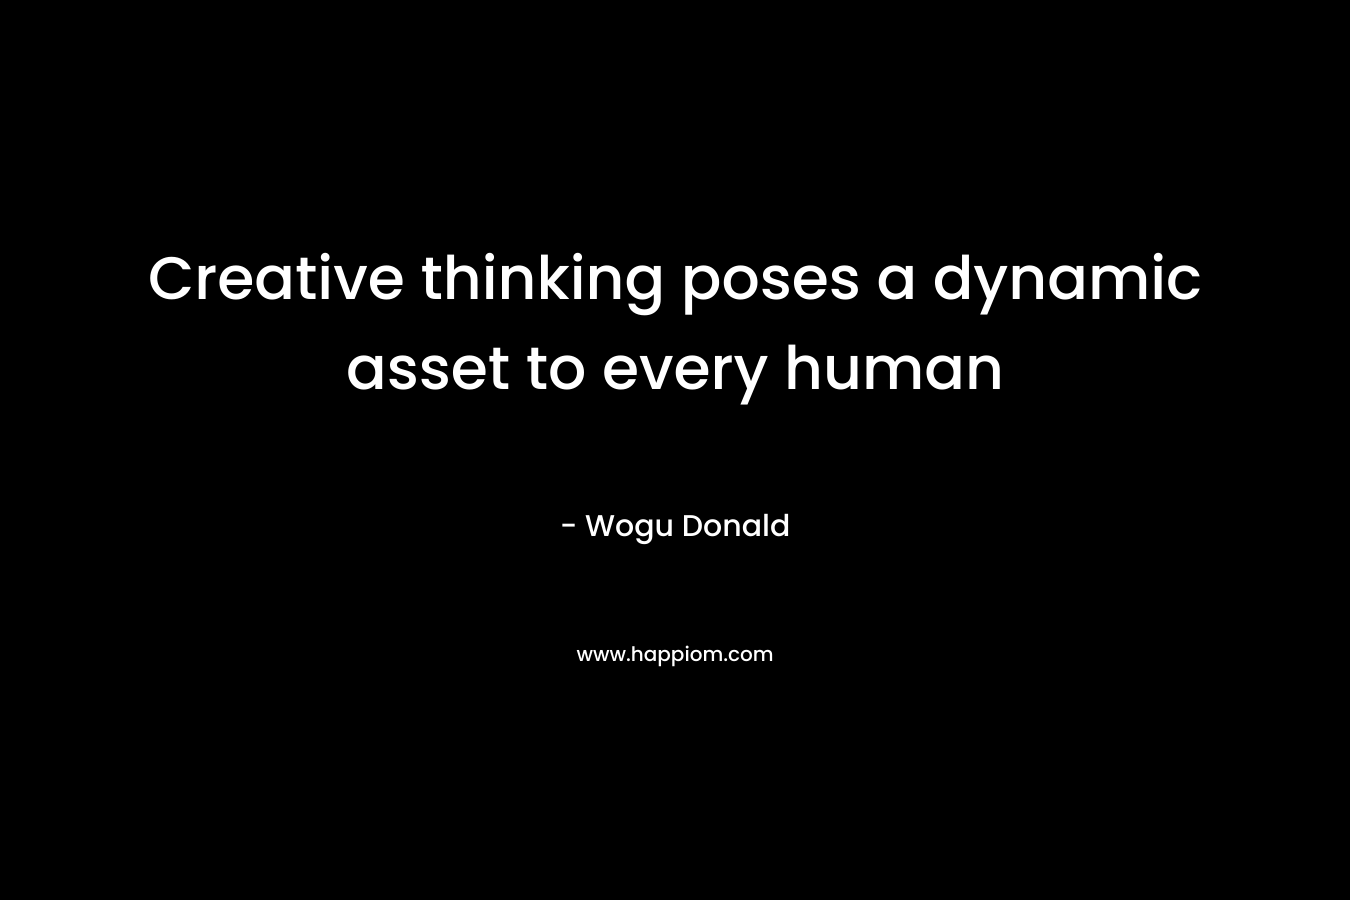 Creative thinking poses a dynamic asset to every human